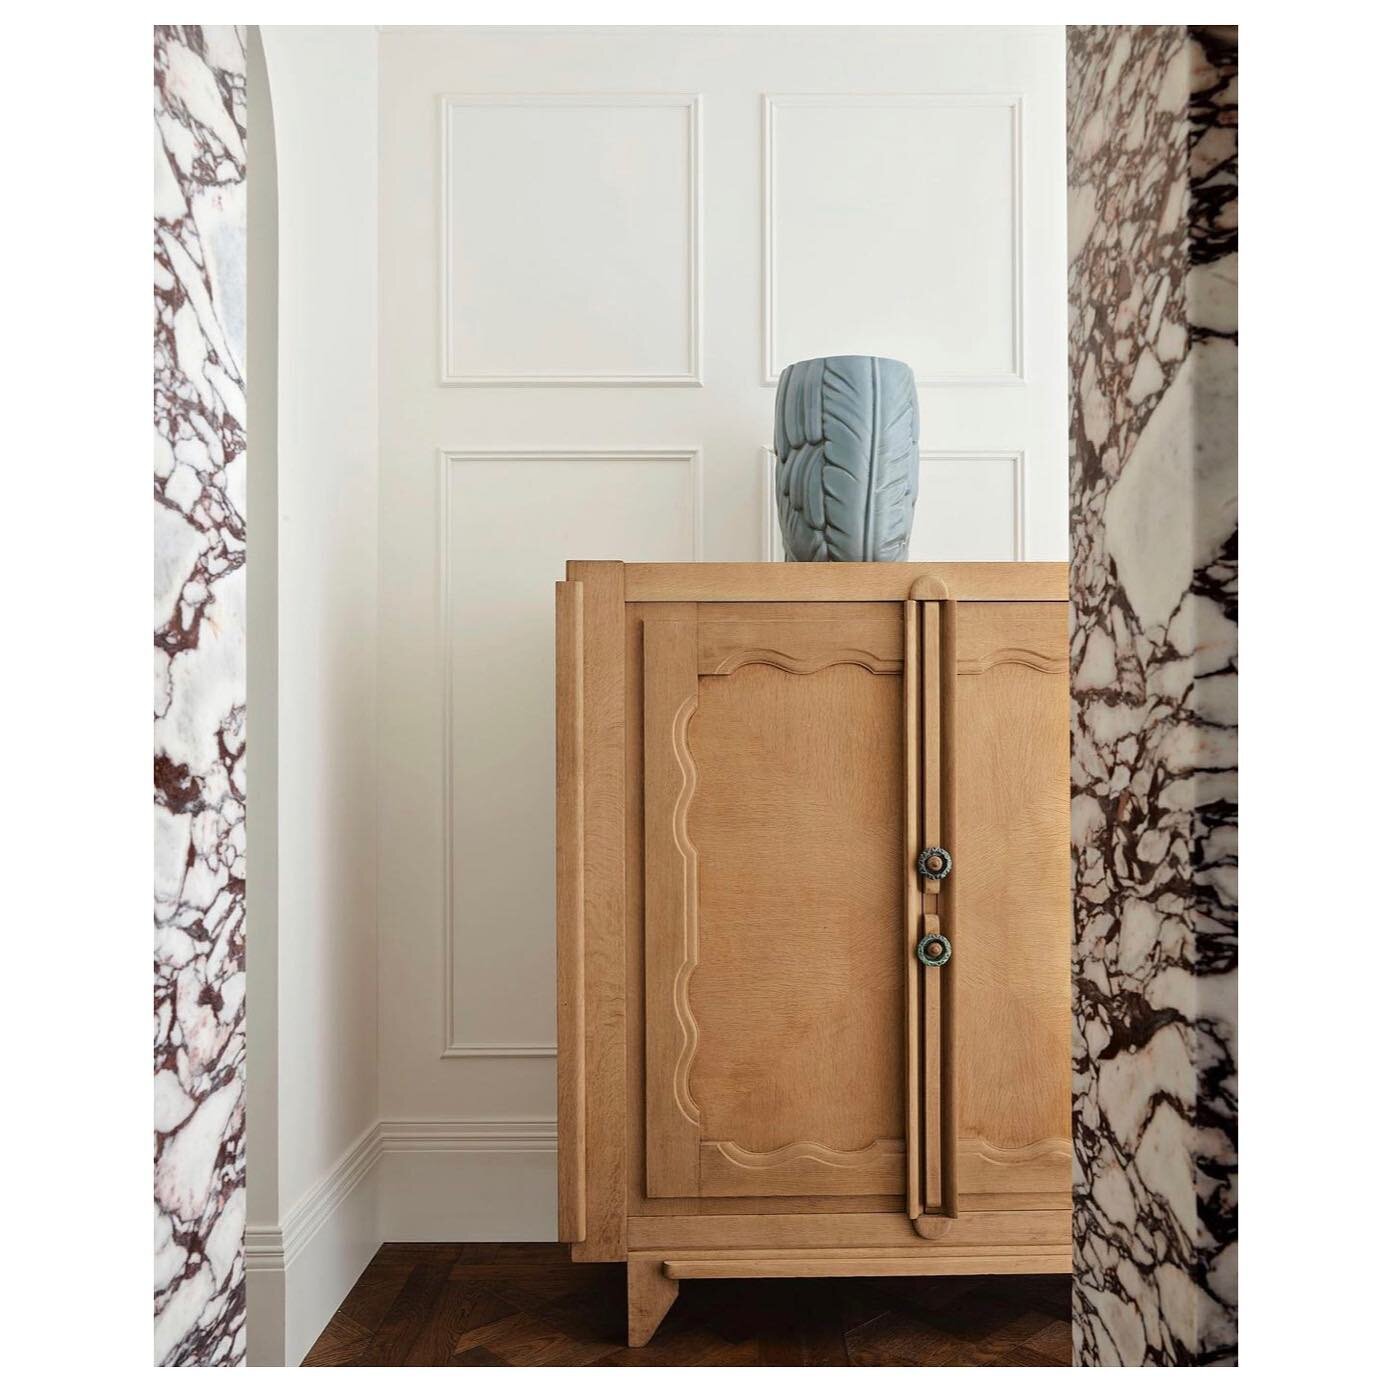 I am sourcing for a linen storage piece and came across this @tamsinjohnson post. How beautiful the detail of the scallop design on this unit and the colour of the Ash against Rosa Arabescato marble 👌🏼